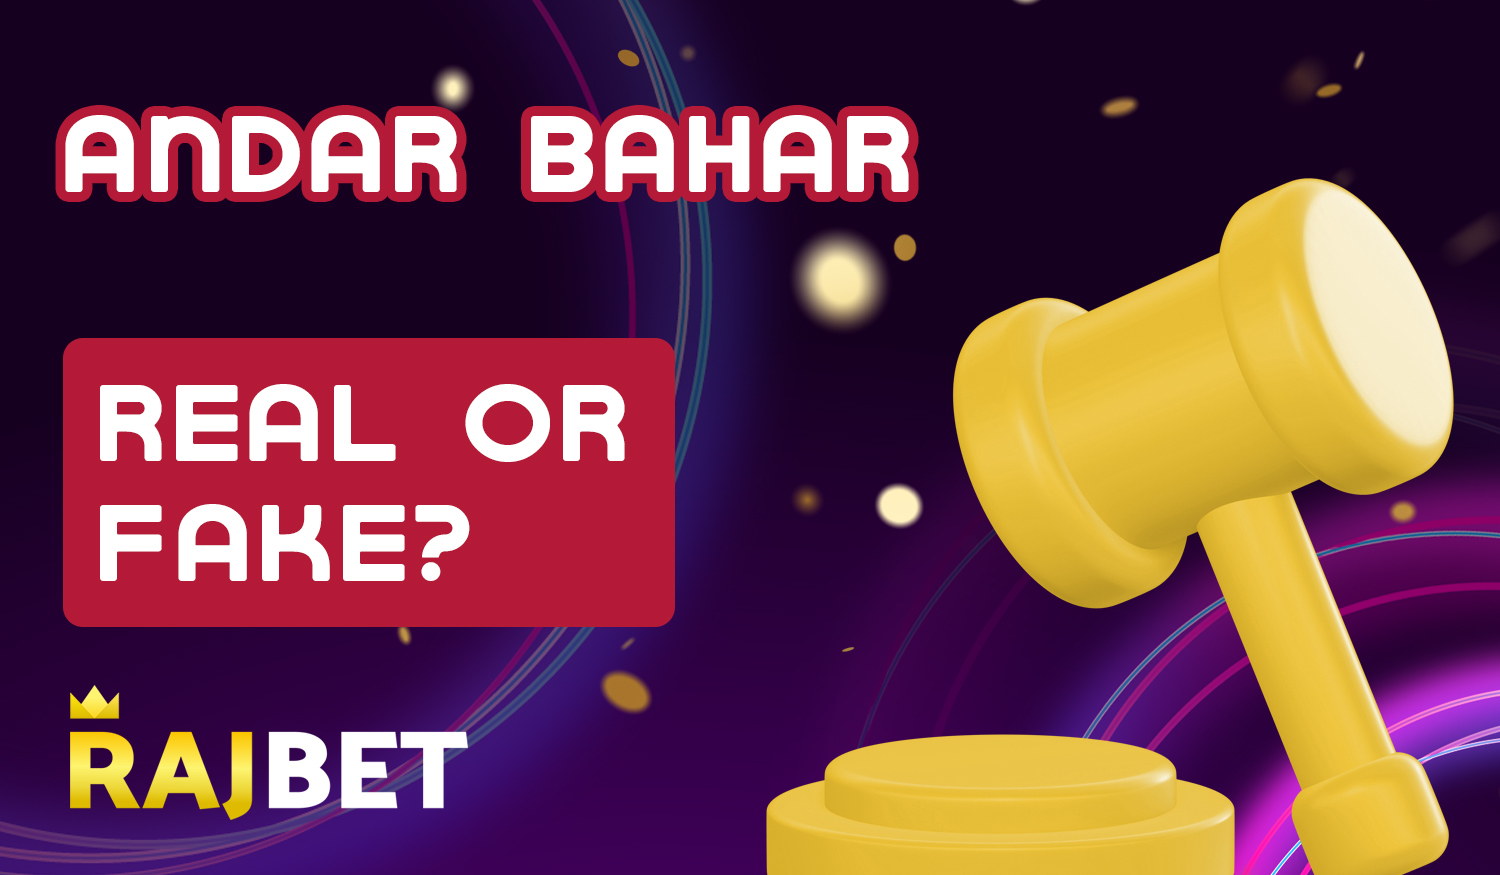 Can Rajbet online casino site be trusted by users from India?